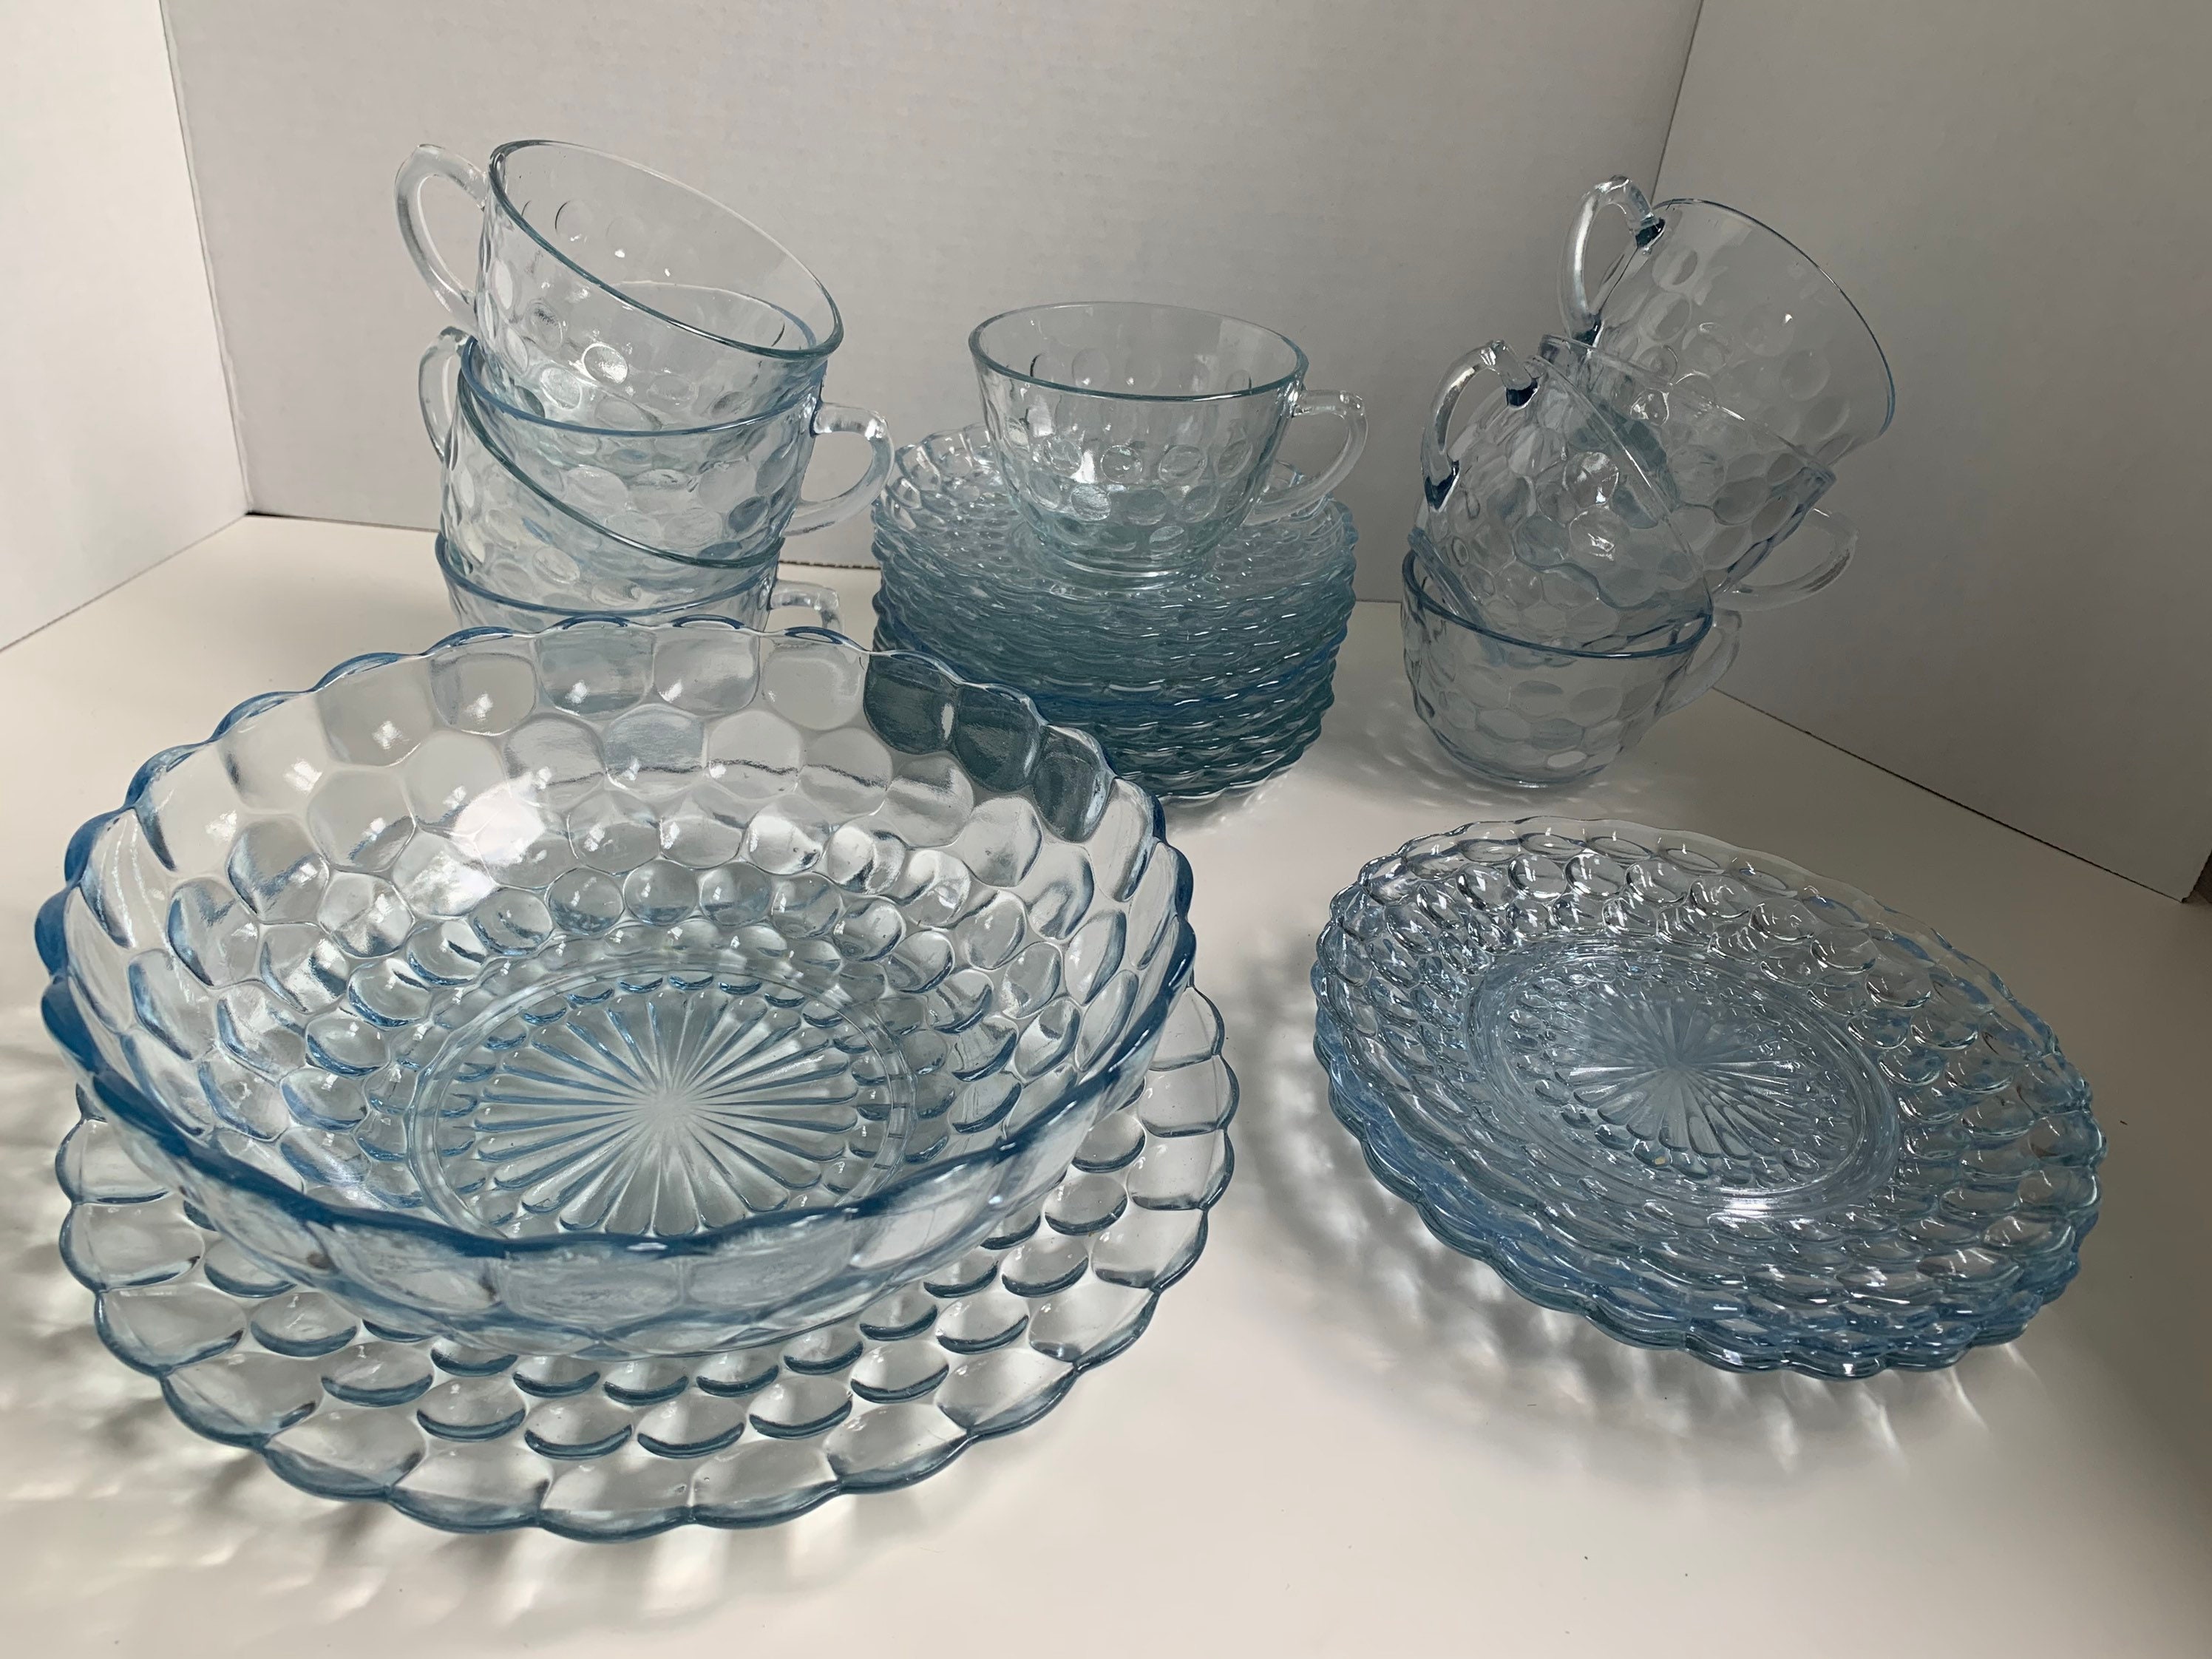 A Matching Set of 6-8 Oz Clear Glass Bubble Cups Heat Proof Fire King by  Anchor Hocking. Glass 375 